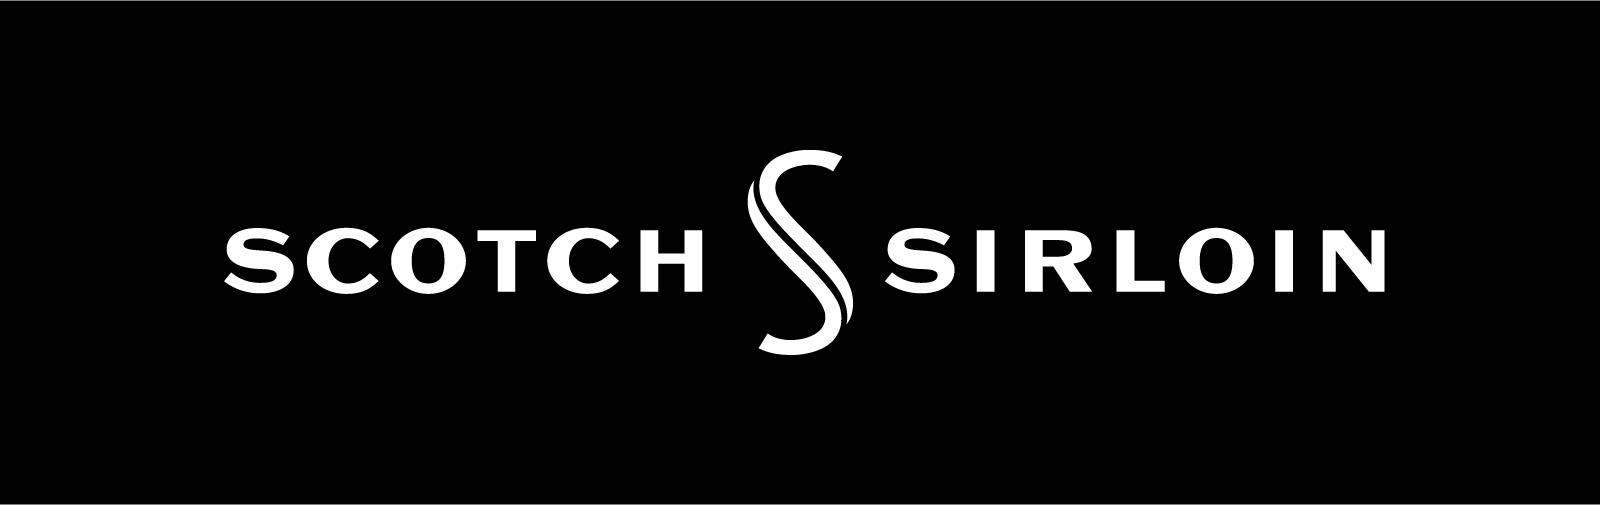 Brand Logo for the Scotch and Sirloin, white on black background